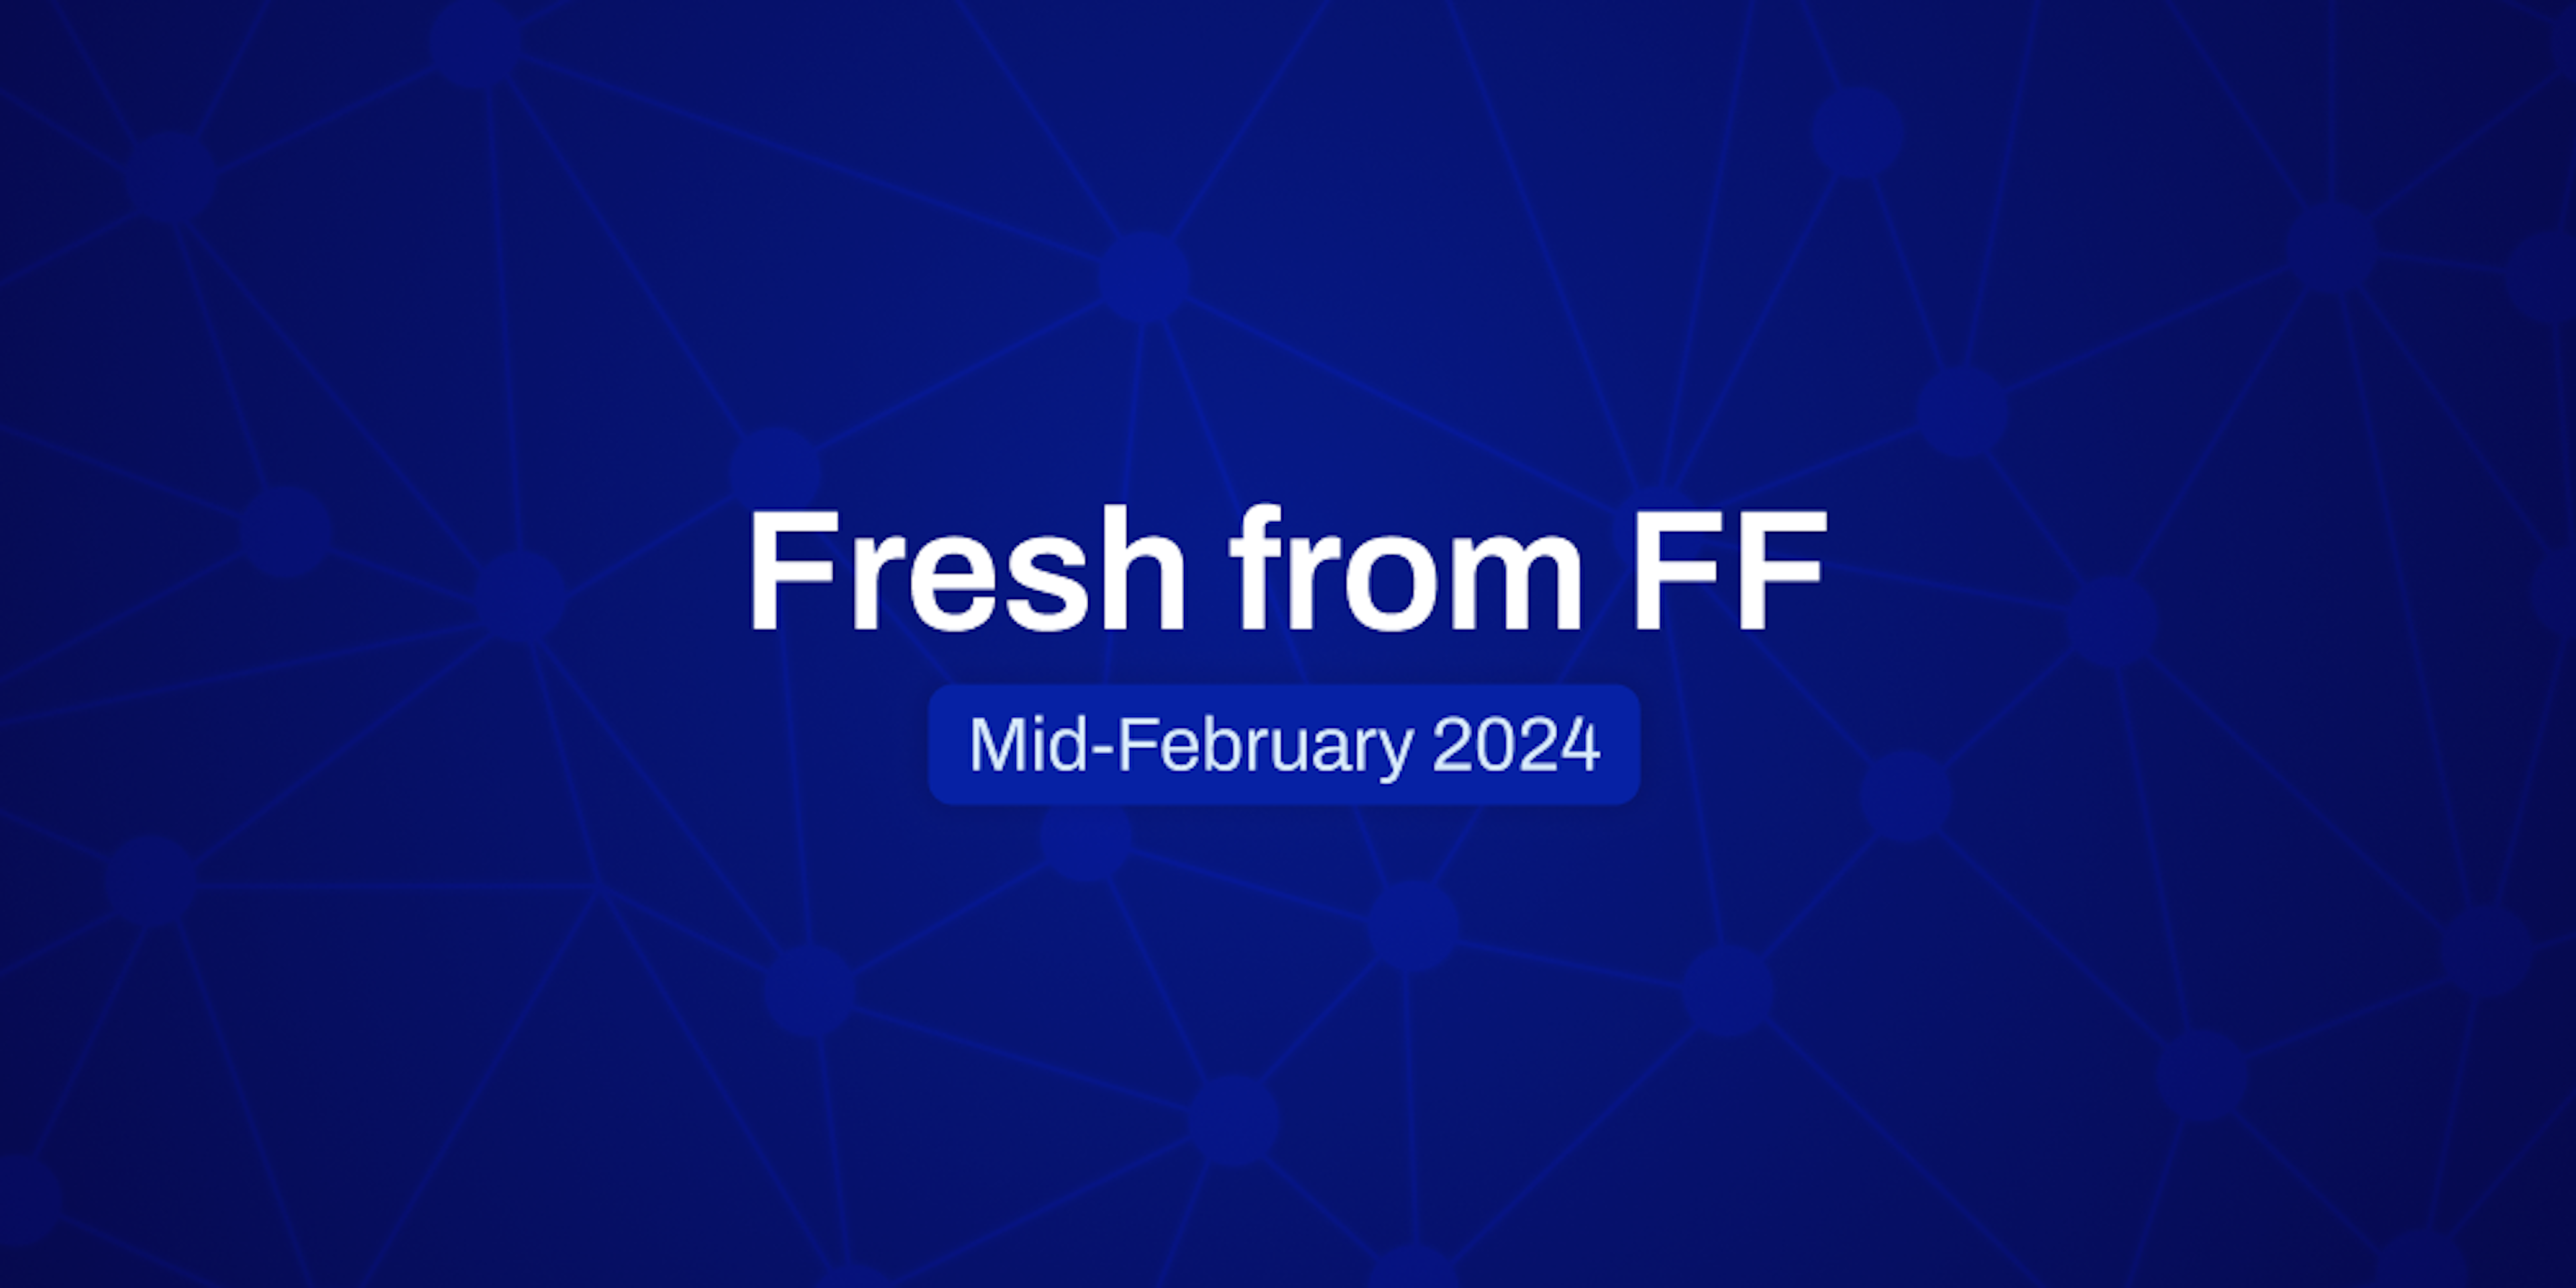 Fresh from FF, Mid-February, 2024 on a radial blue background.